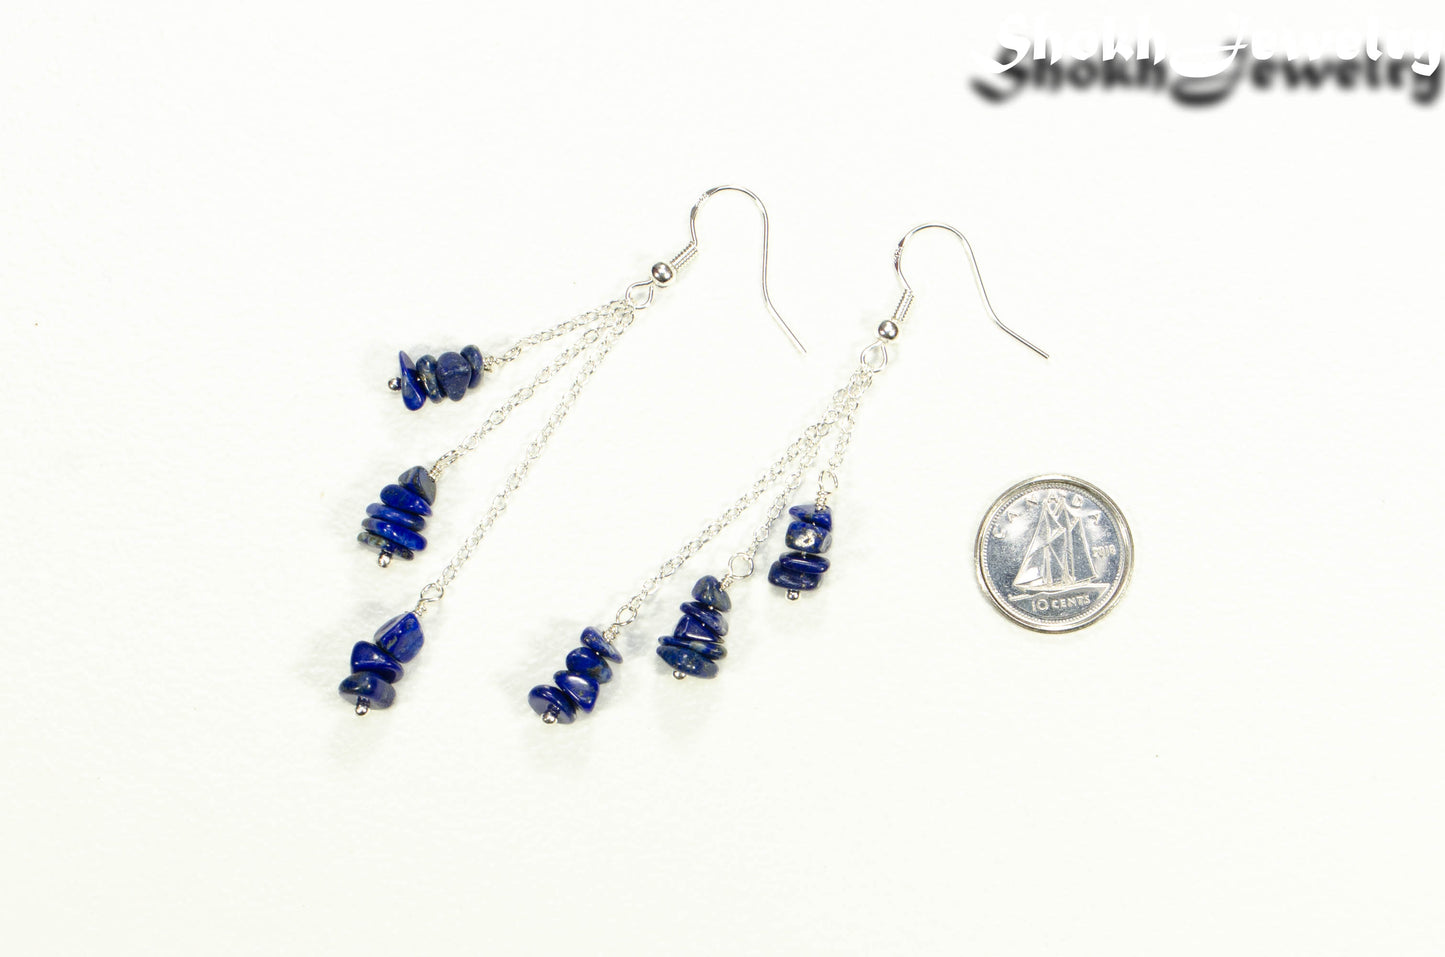 Long Silver Plated Chain and Lapis Lazuli Chip Earrings beside a dime